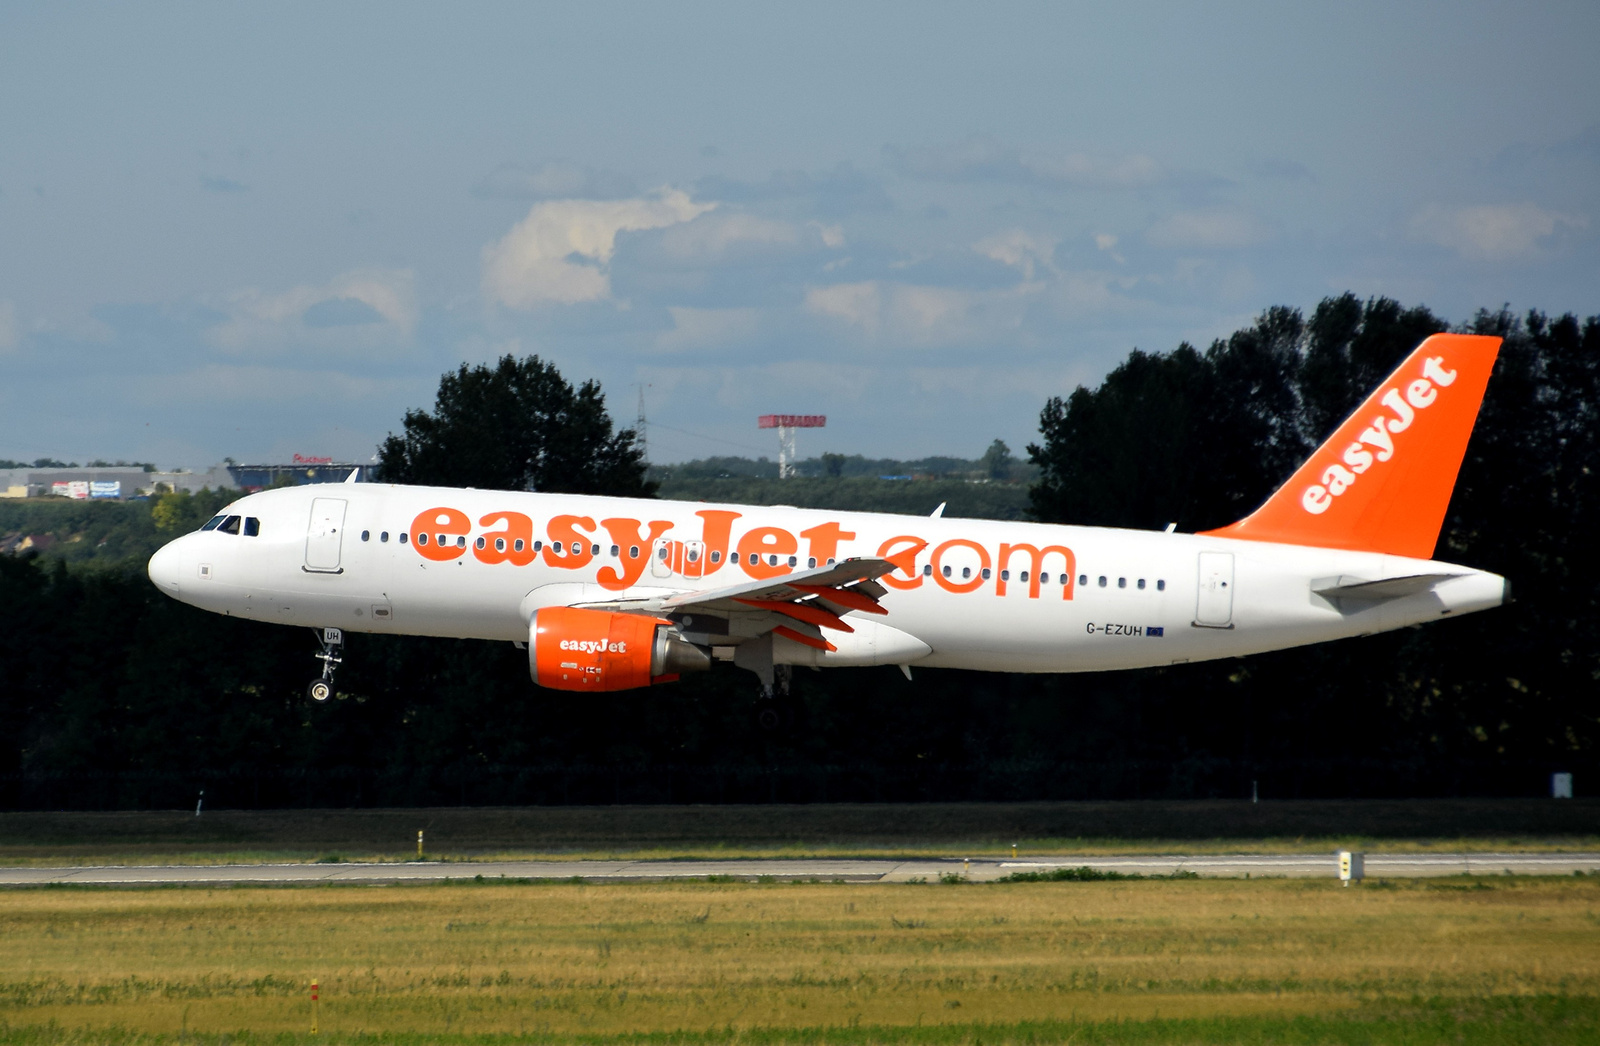 EasyJet Airline - Airbus A320-214